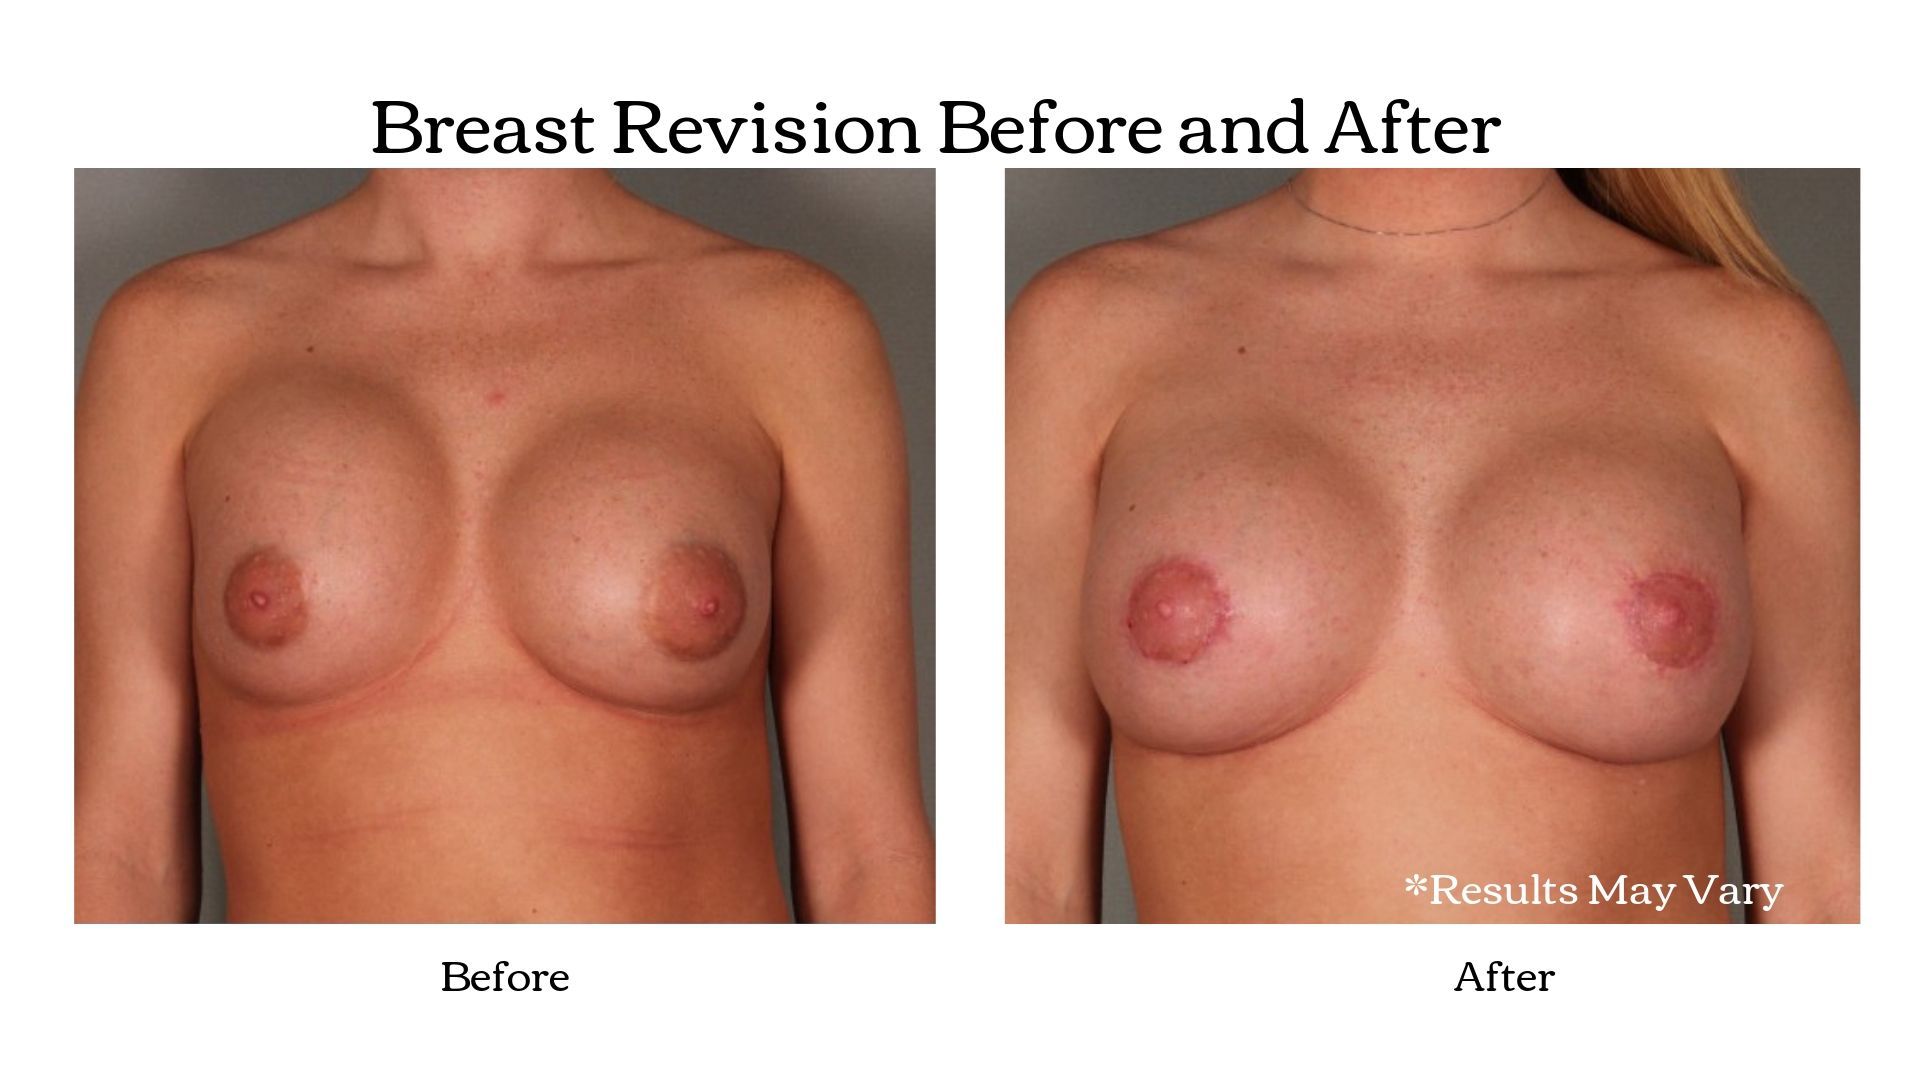 Before and after images of a patient who underwent breast revision after her breast augmentation to correct capsular contracture.